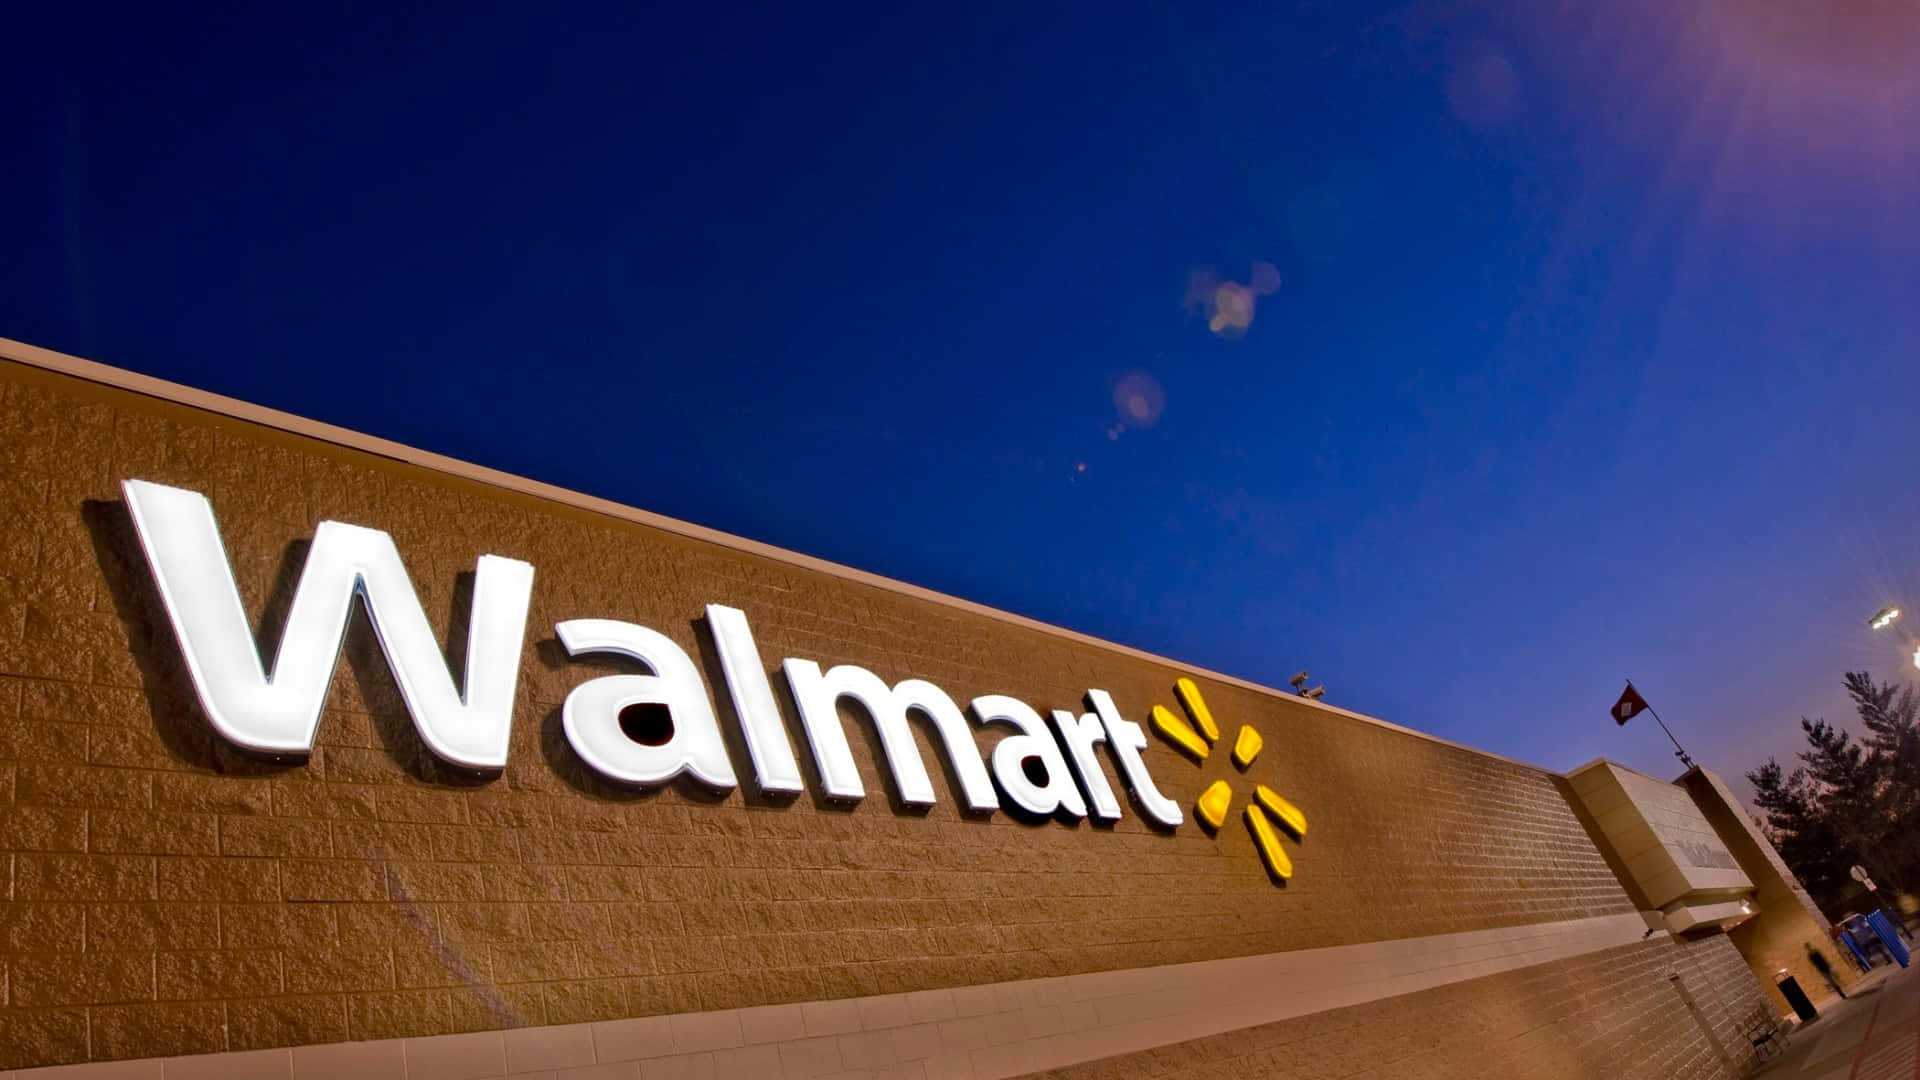 walmart's new logo is shown at night